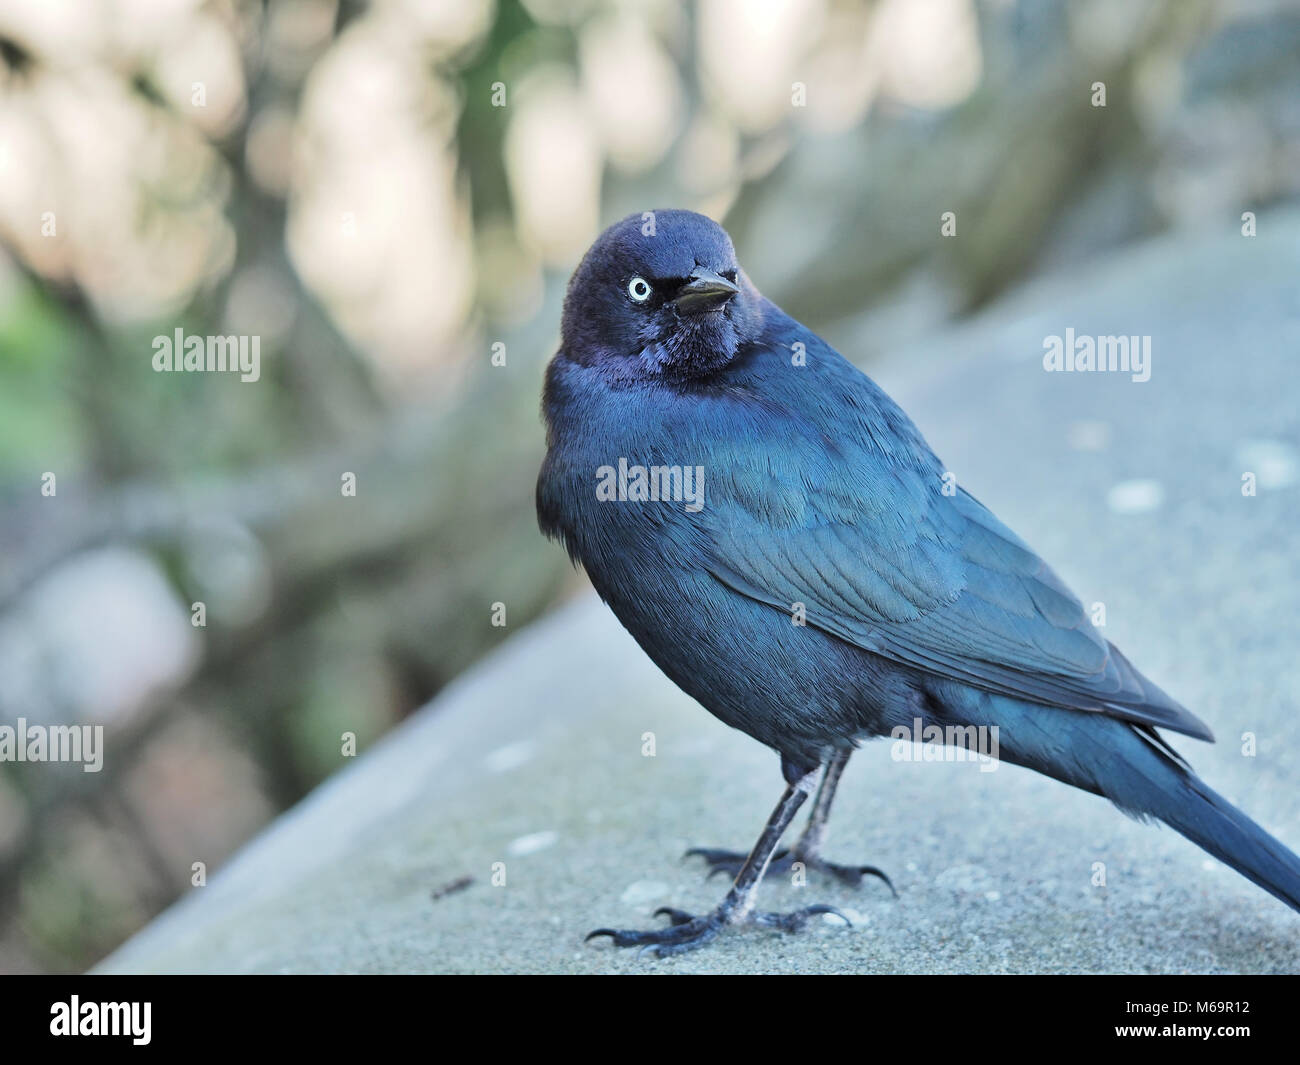 A small black bird sitting on top of a blue barrel photo – Free